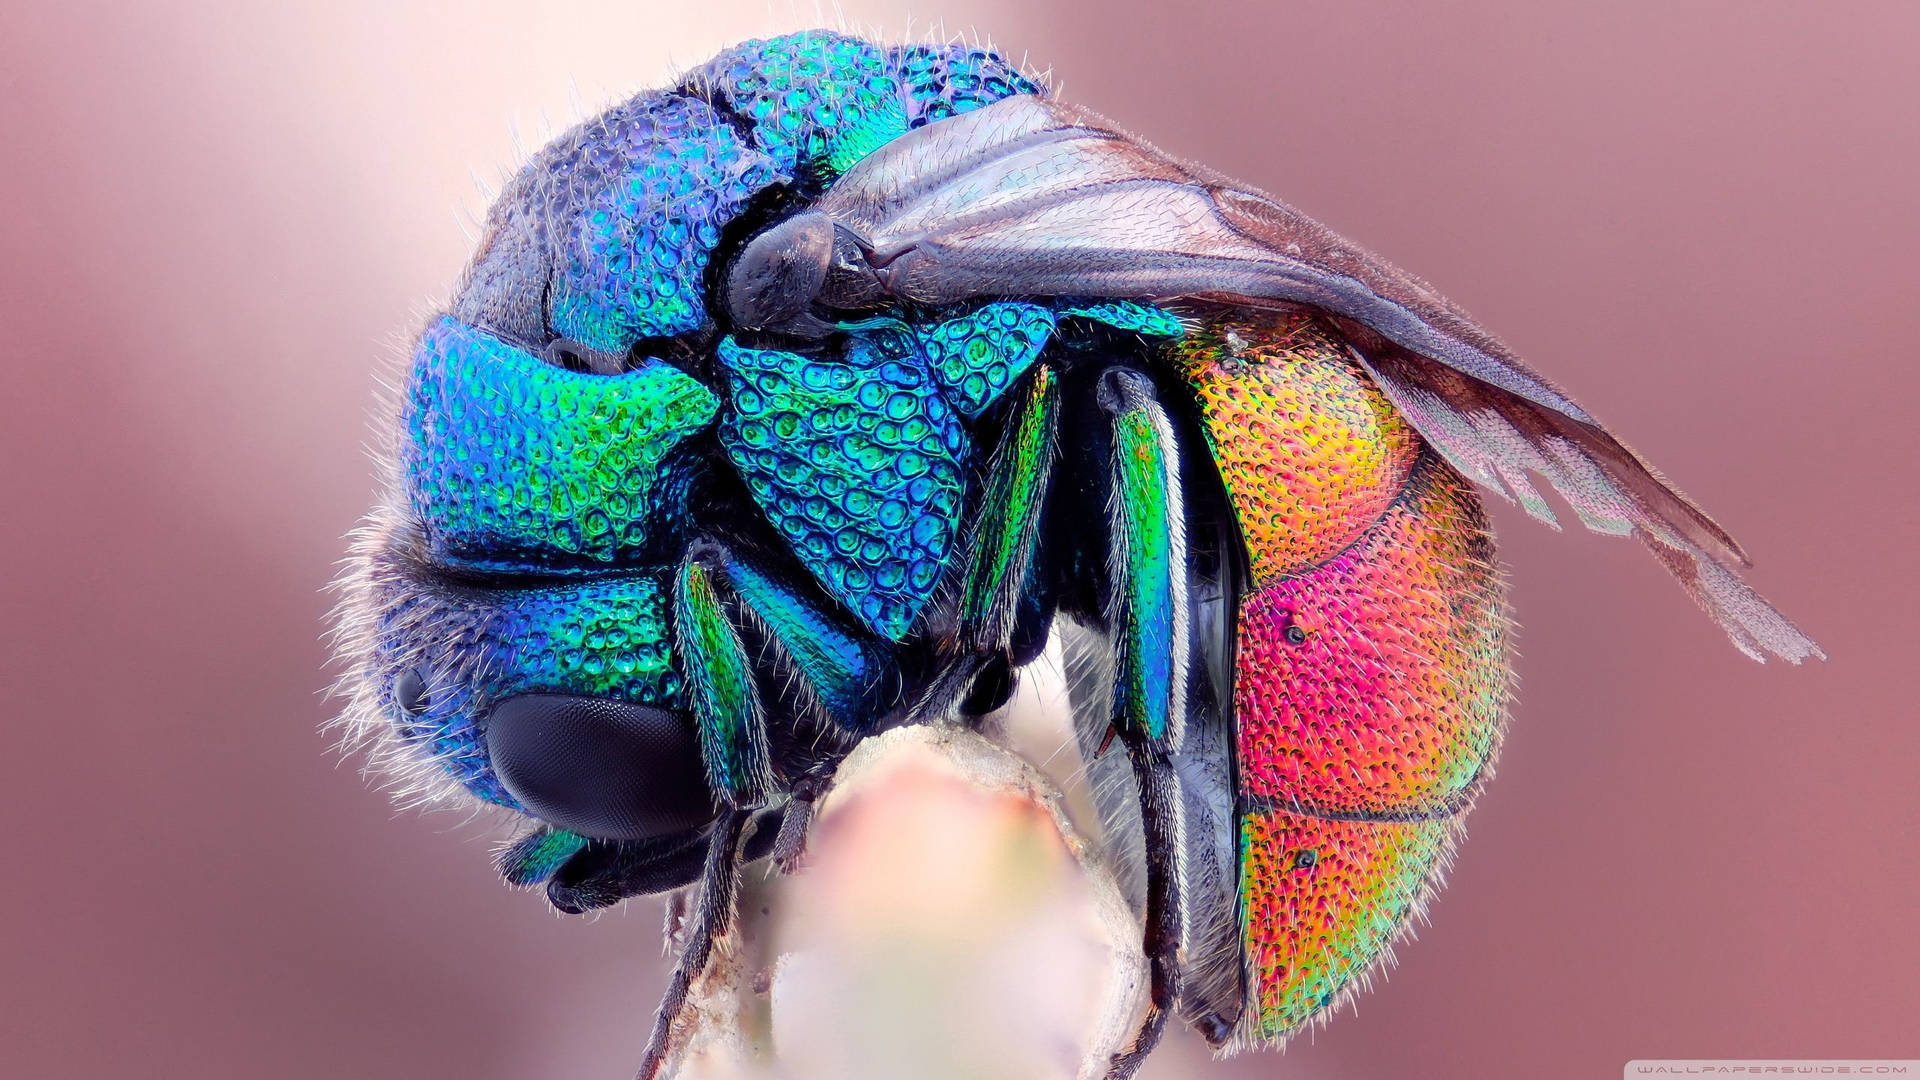 Insect With Iridescent Body Background